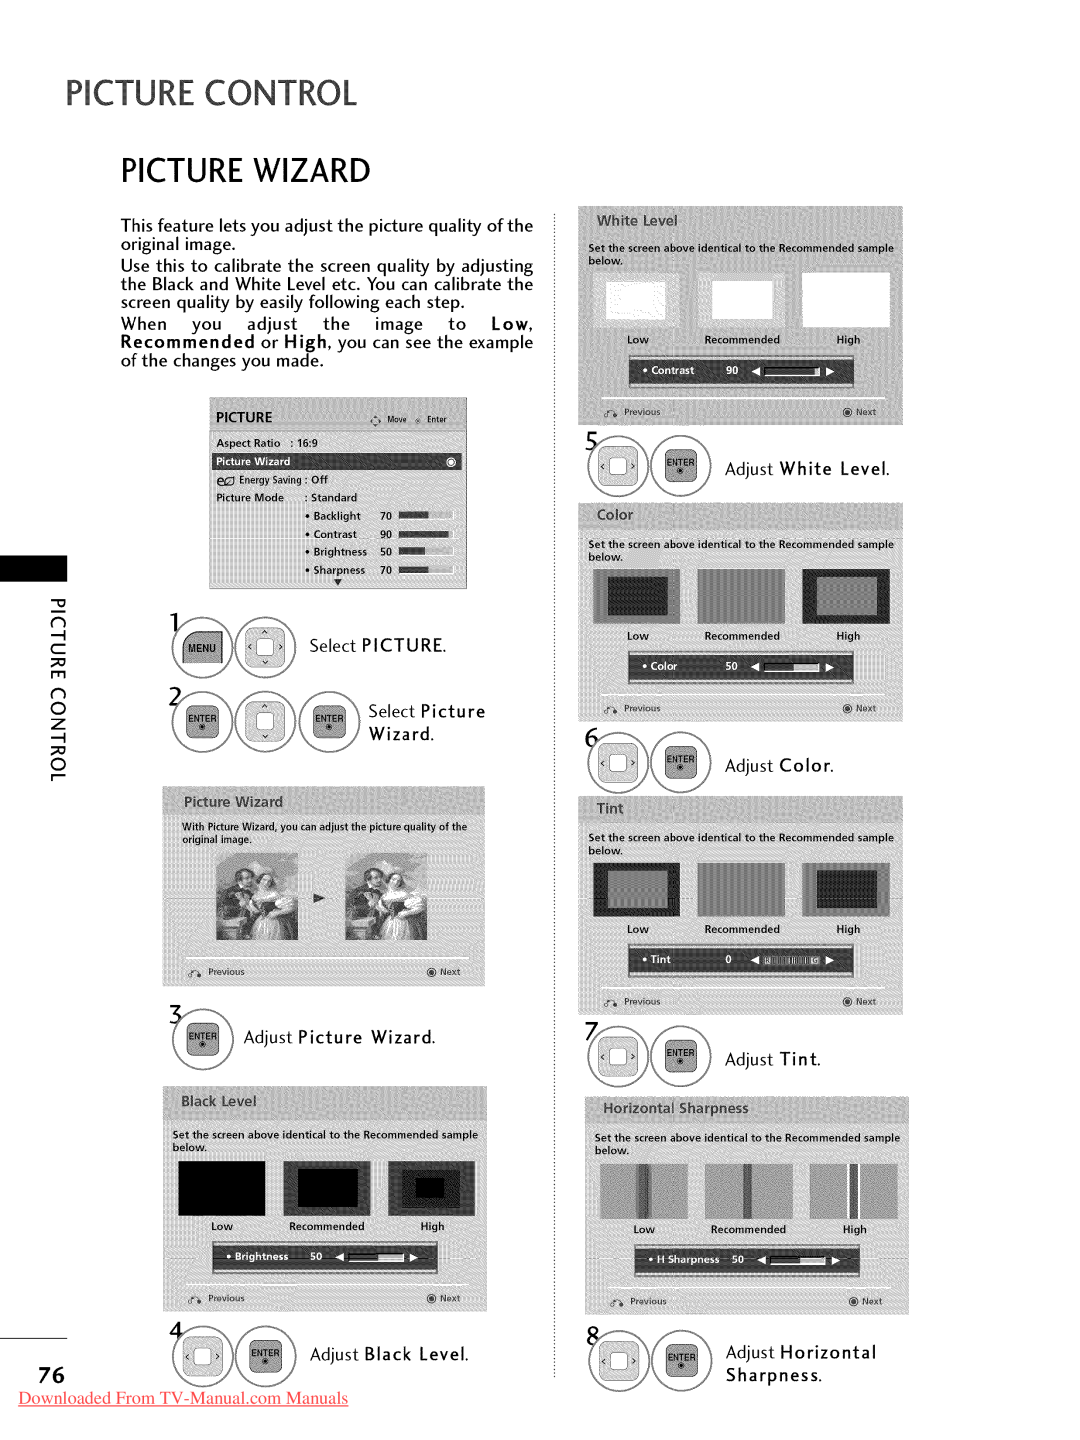 LG Electronics 26LD350 Picturecontrol, Picturewizard, Downloaded From TV-Manual.com Manuals, Adjust White Level, Wizard 